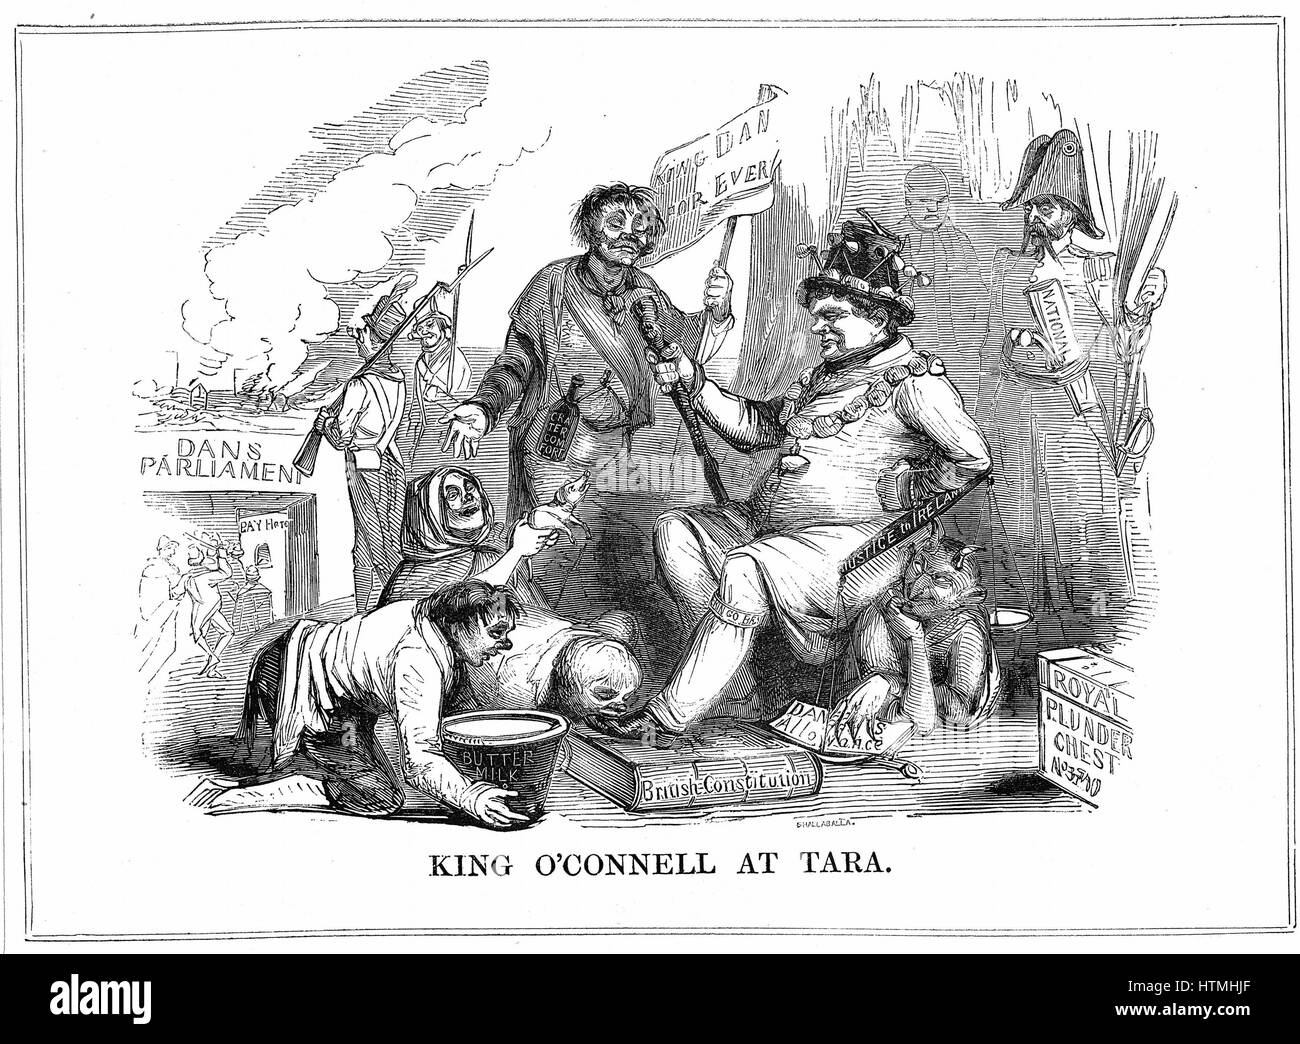 Repeal Meeting at Tara - 1843. Daniel O'Connell (1775-1841) Irish politician, 'The Liberator', leader of Repeal (of union with Britain) movement, shown as King of the Irish, with his subjects doing him homage and offering him the products of the land. Cartoon from 'Punch', London, 1843. Engraving Stock Photo